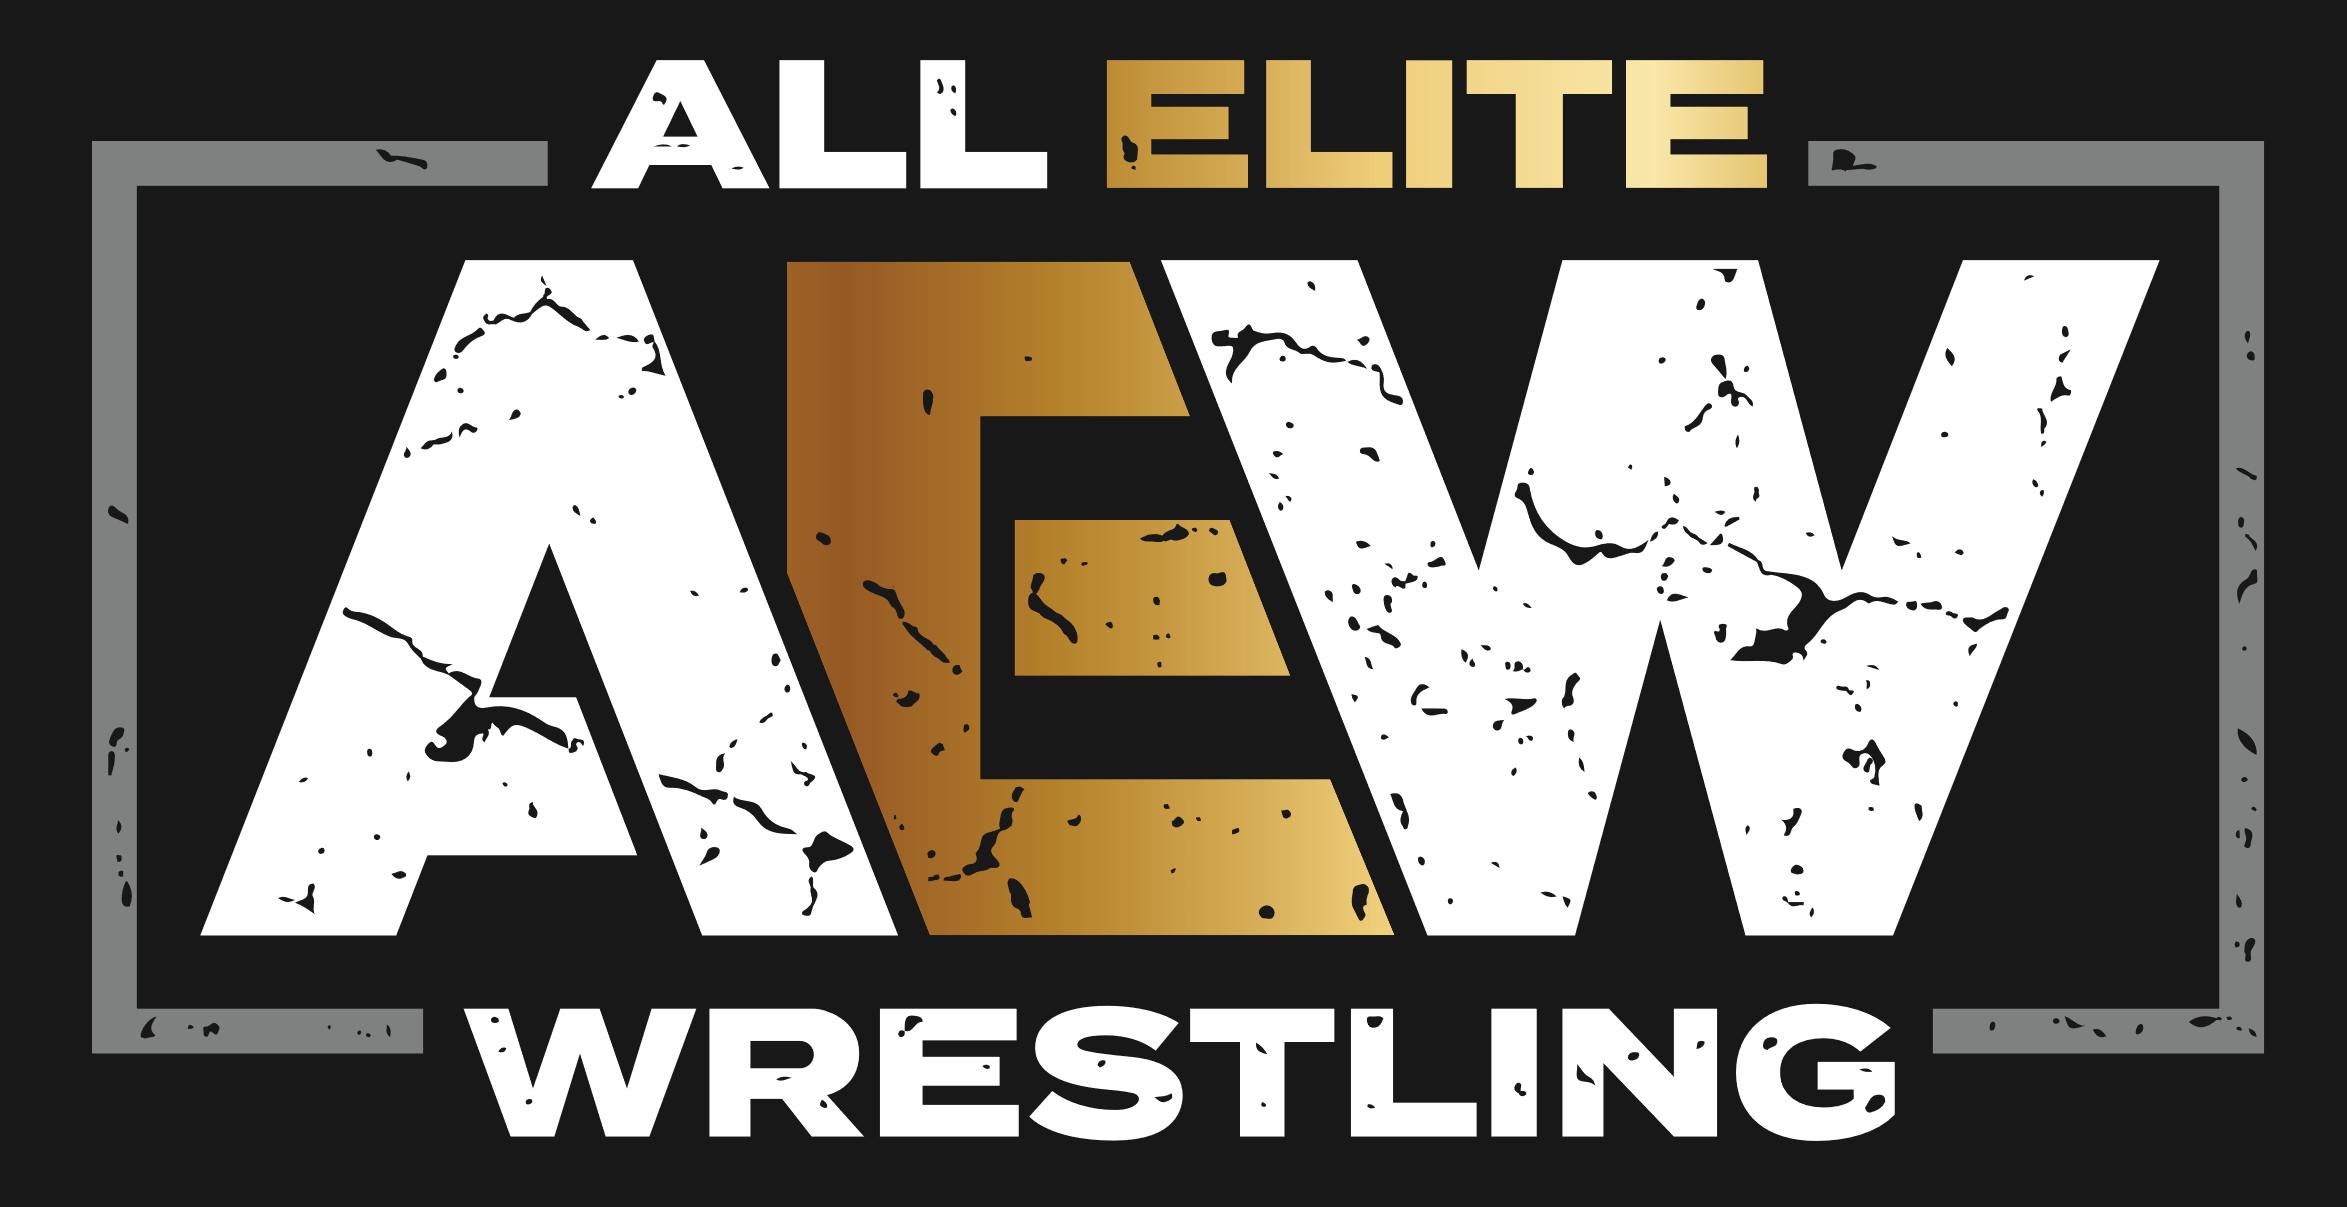 AEW Talent Expresses Frustration Over Limited Opportunities and Declining Audience Attendance